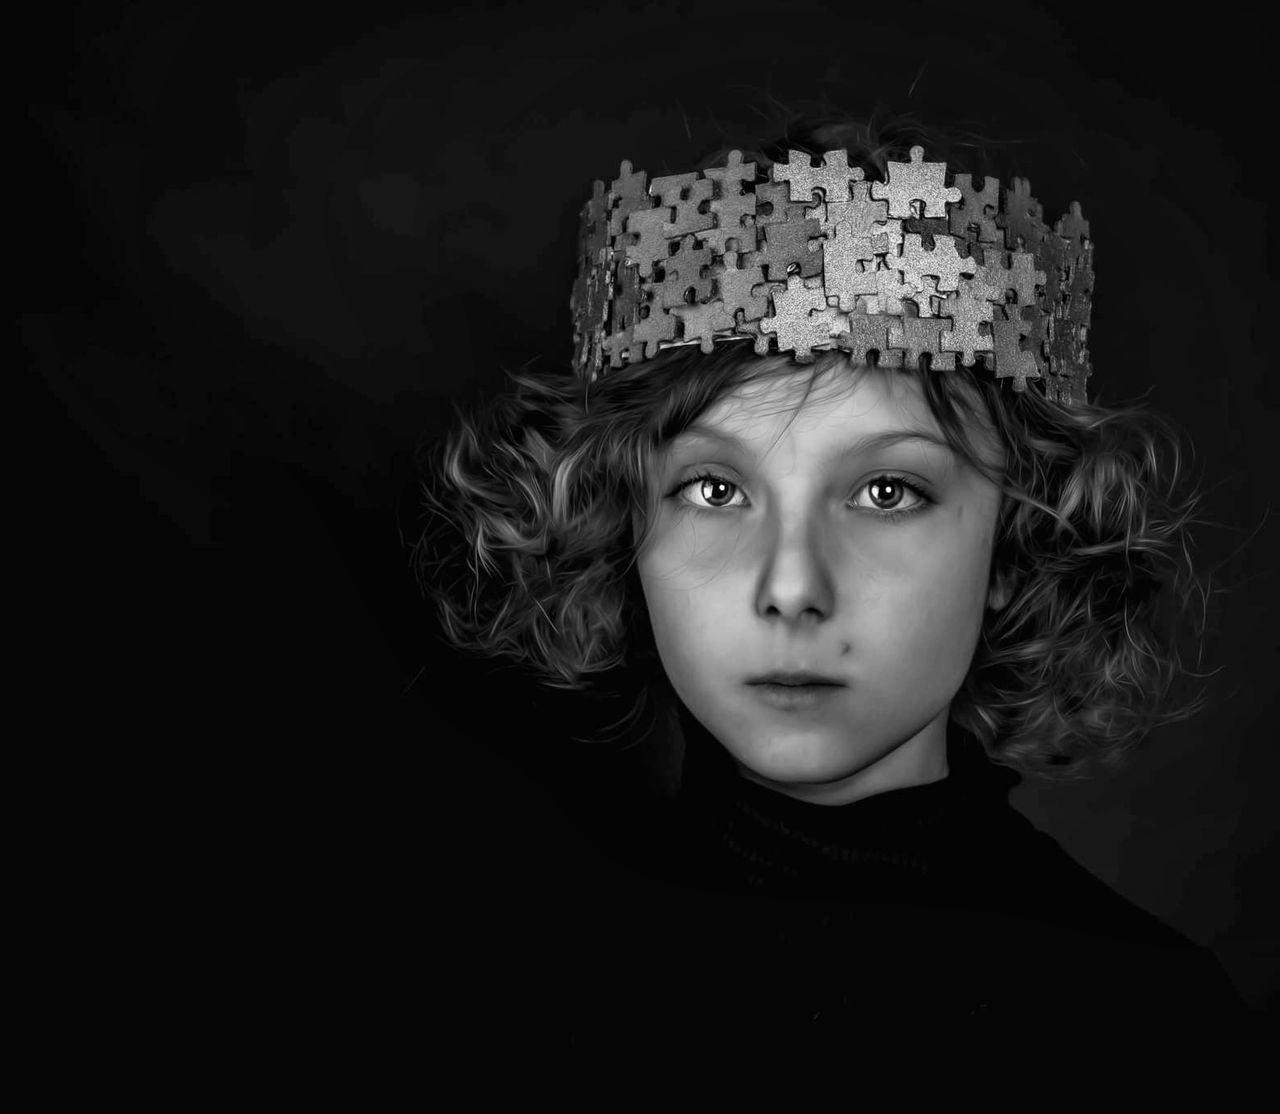 portrait, looking at camera, black, black and white, one person, headshot, child, darkness, indoors, monochrome photography, childhood, front view, monochrome, women, black background, clothing, studio shot, fashion accessory, female, white, serious, copy space, hat, close-up, innocence, looking, person, crown